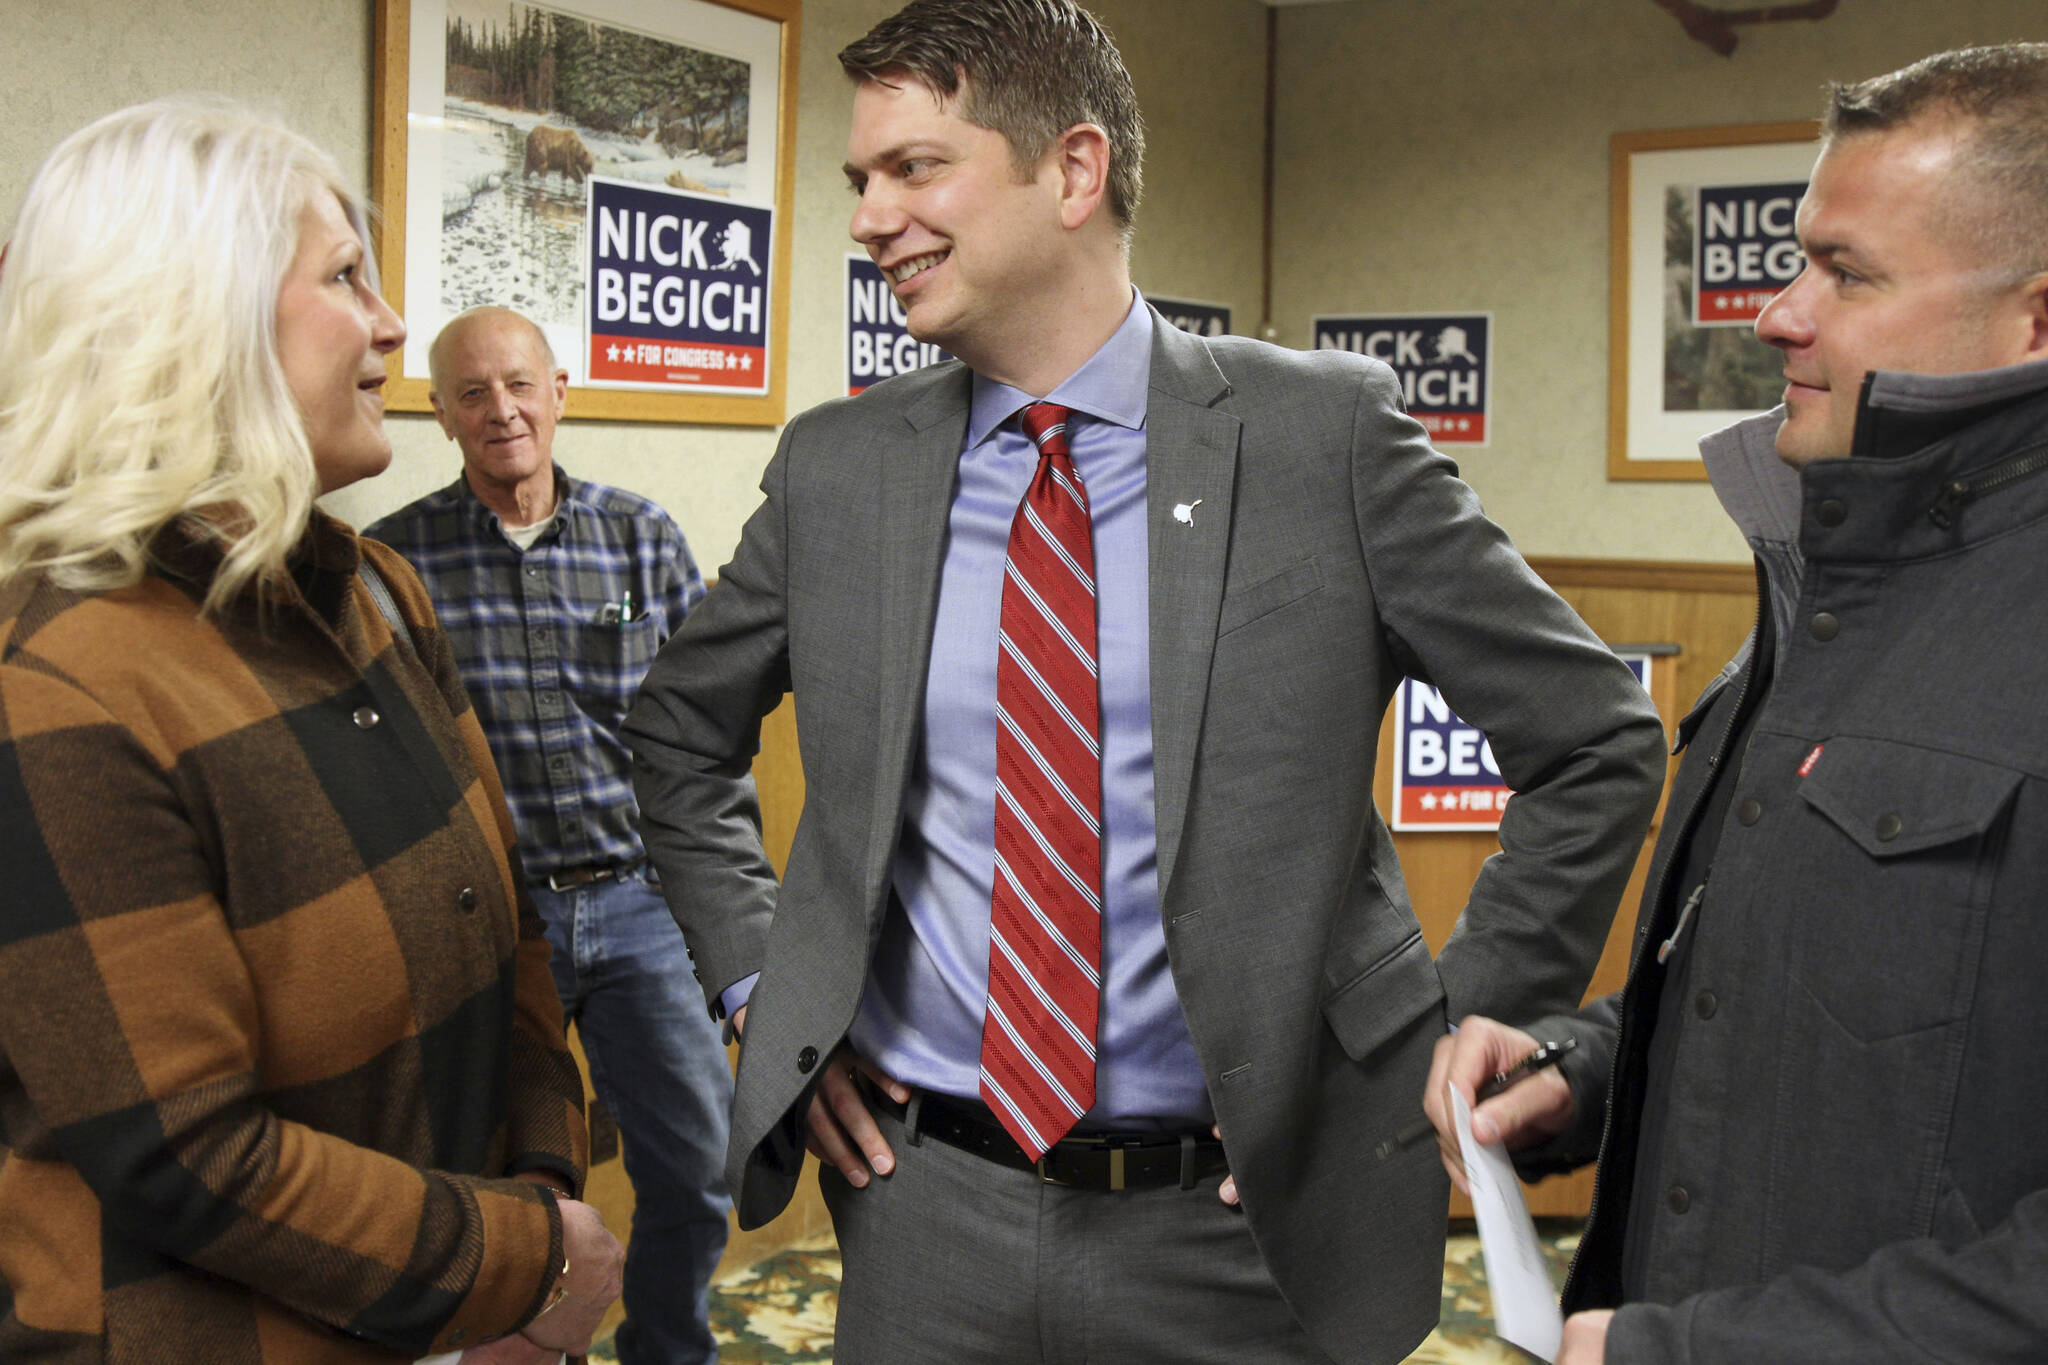 Nicholas Begich III (middle) speaks with supporters ahead of announcing his plans to run for Alaska’s lone U.S. House seat on Thursday, Oct. 28, 2021, in Wasilla, Alaska. Begich, a Republican, plans to run for the seat that has been held since 1973 by Republican Rep. Don Young. (AP Photo / Mark Thiessen)